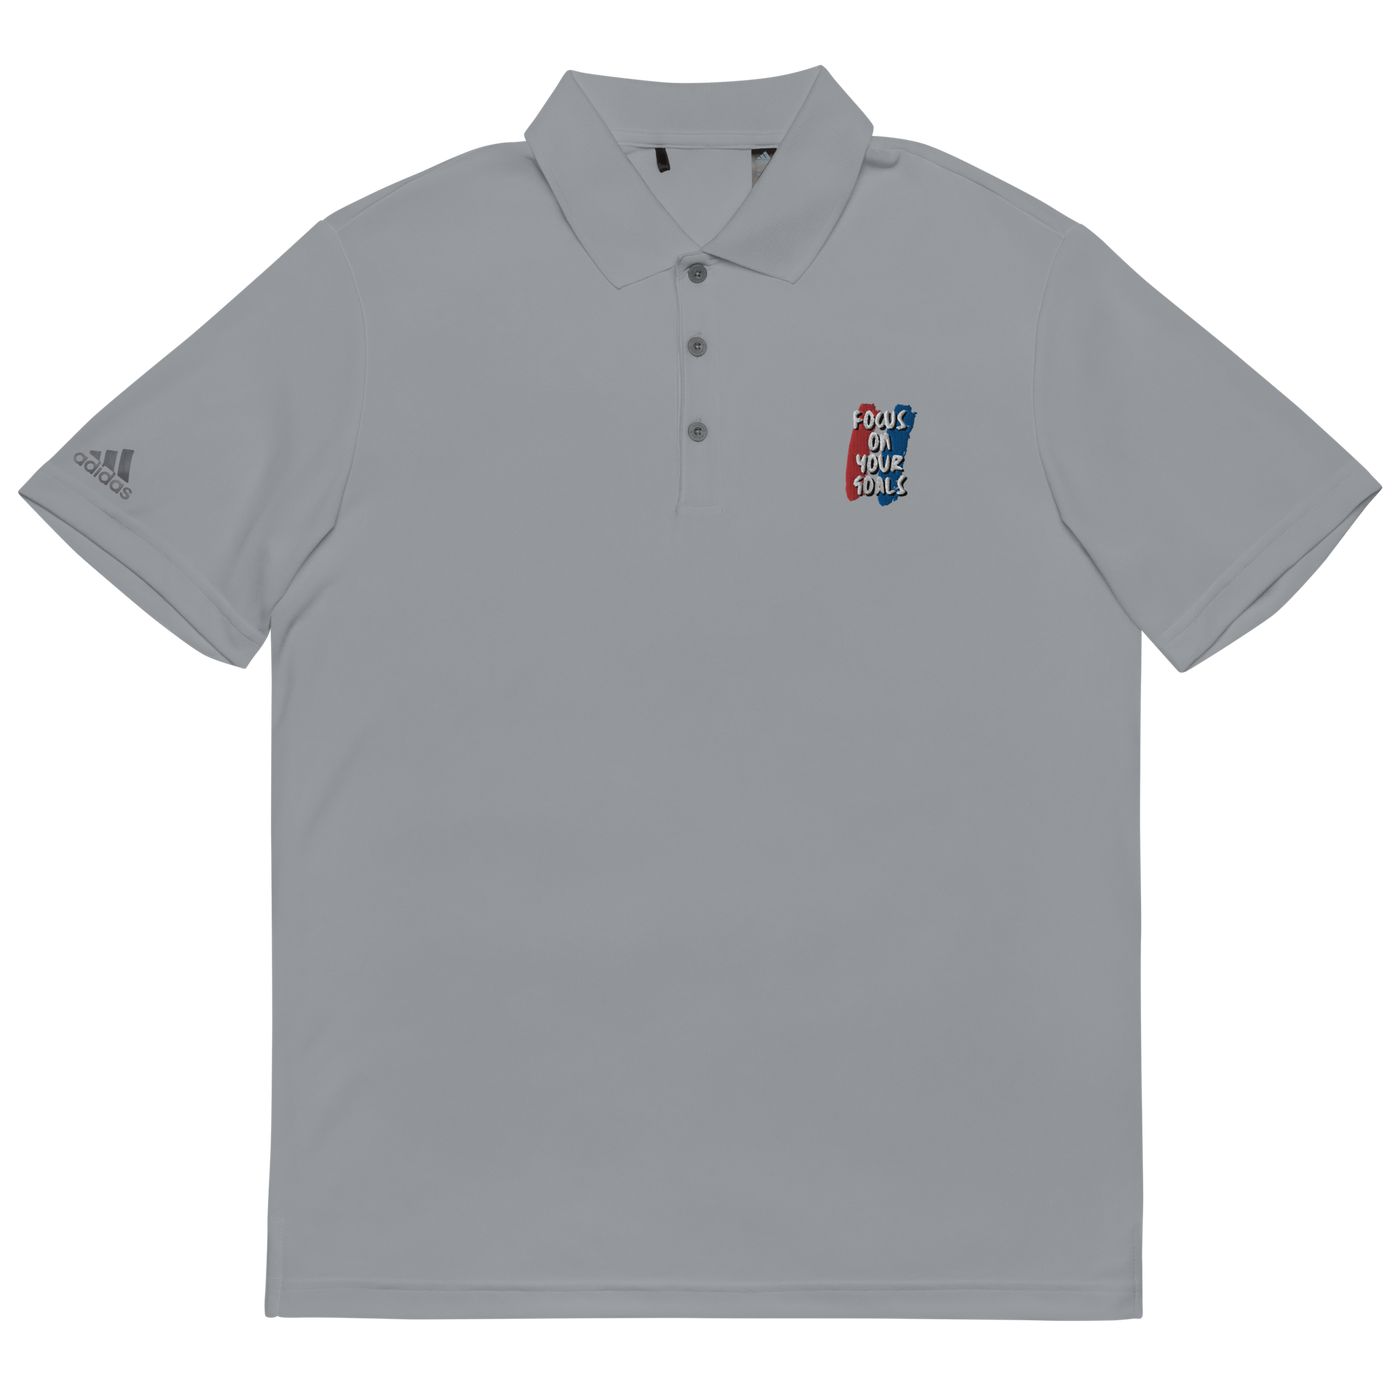 Adidas Performance Embroidered Gray Polo Shirt - Focus On Your Goals